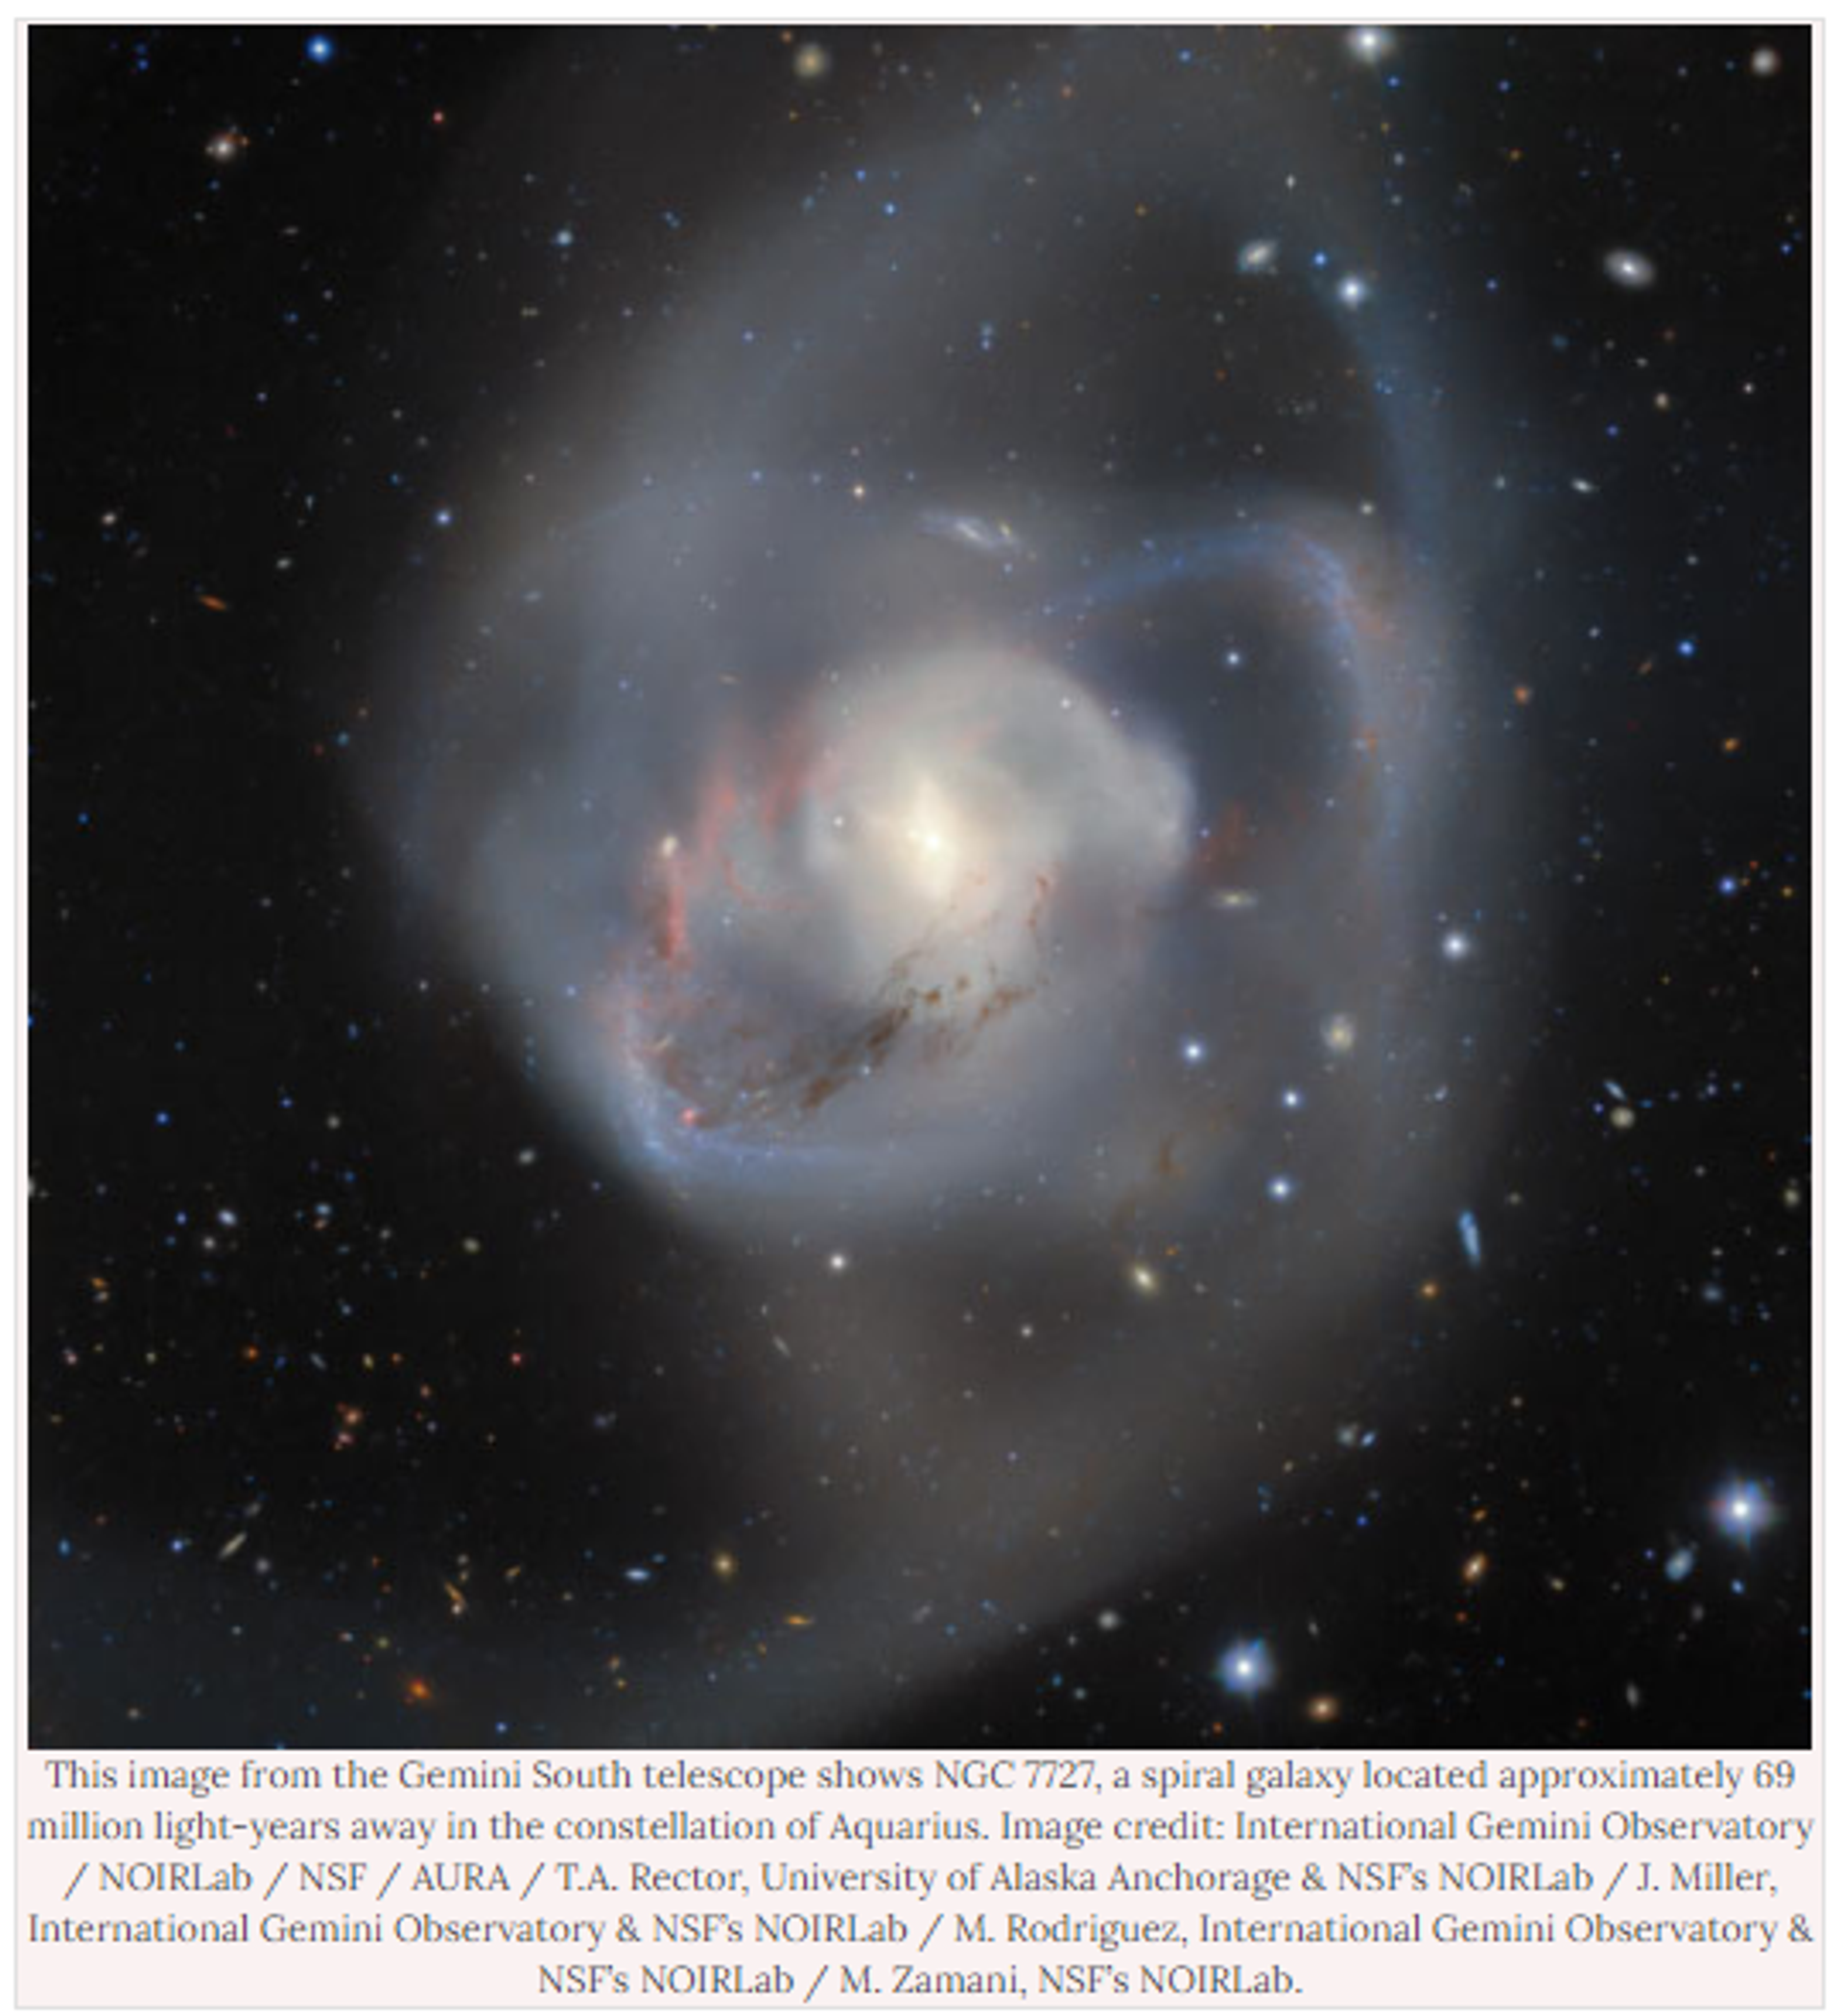 Screenshot of image from the Gemini South telescope showing NGC 7727, a spiral galaxy some 69 million light-years away in the constellation of Aquarius. - Sputnik International, 1920, 28.10.2023